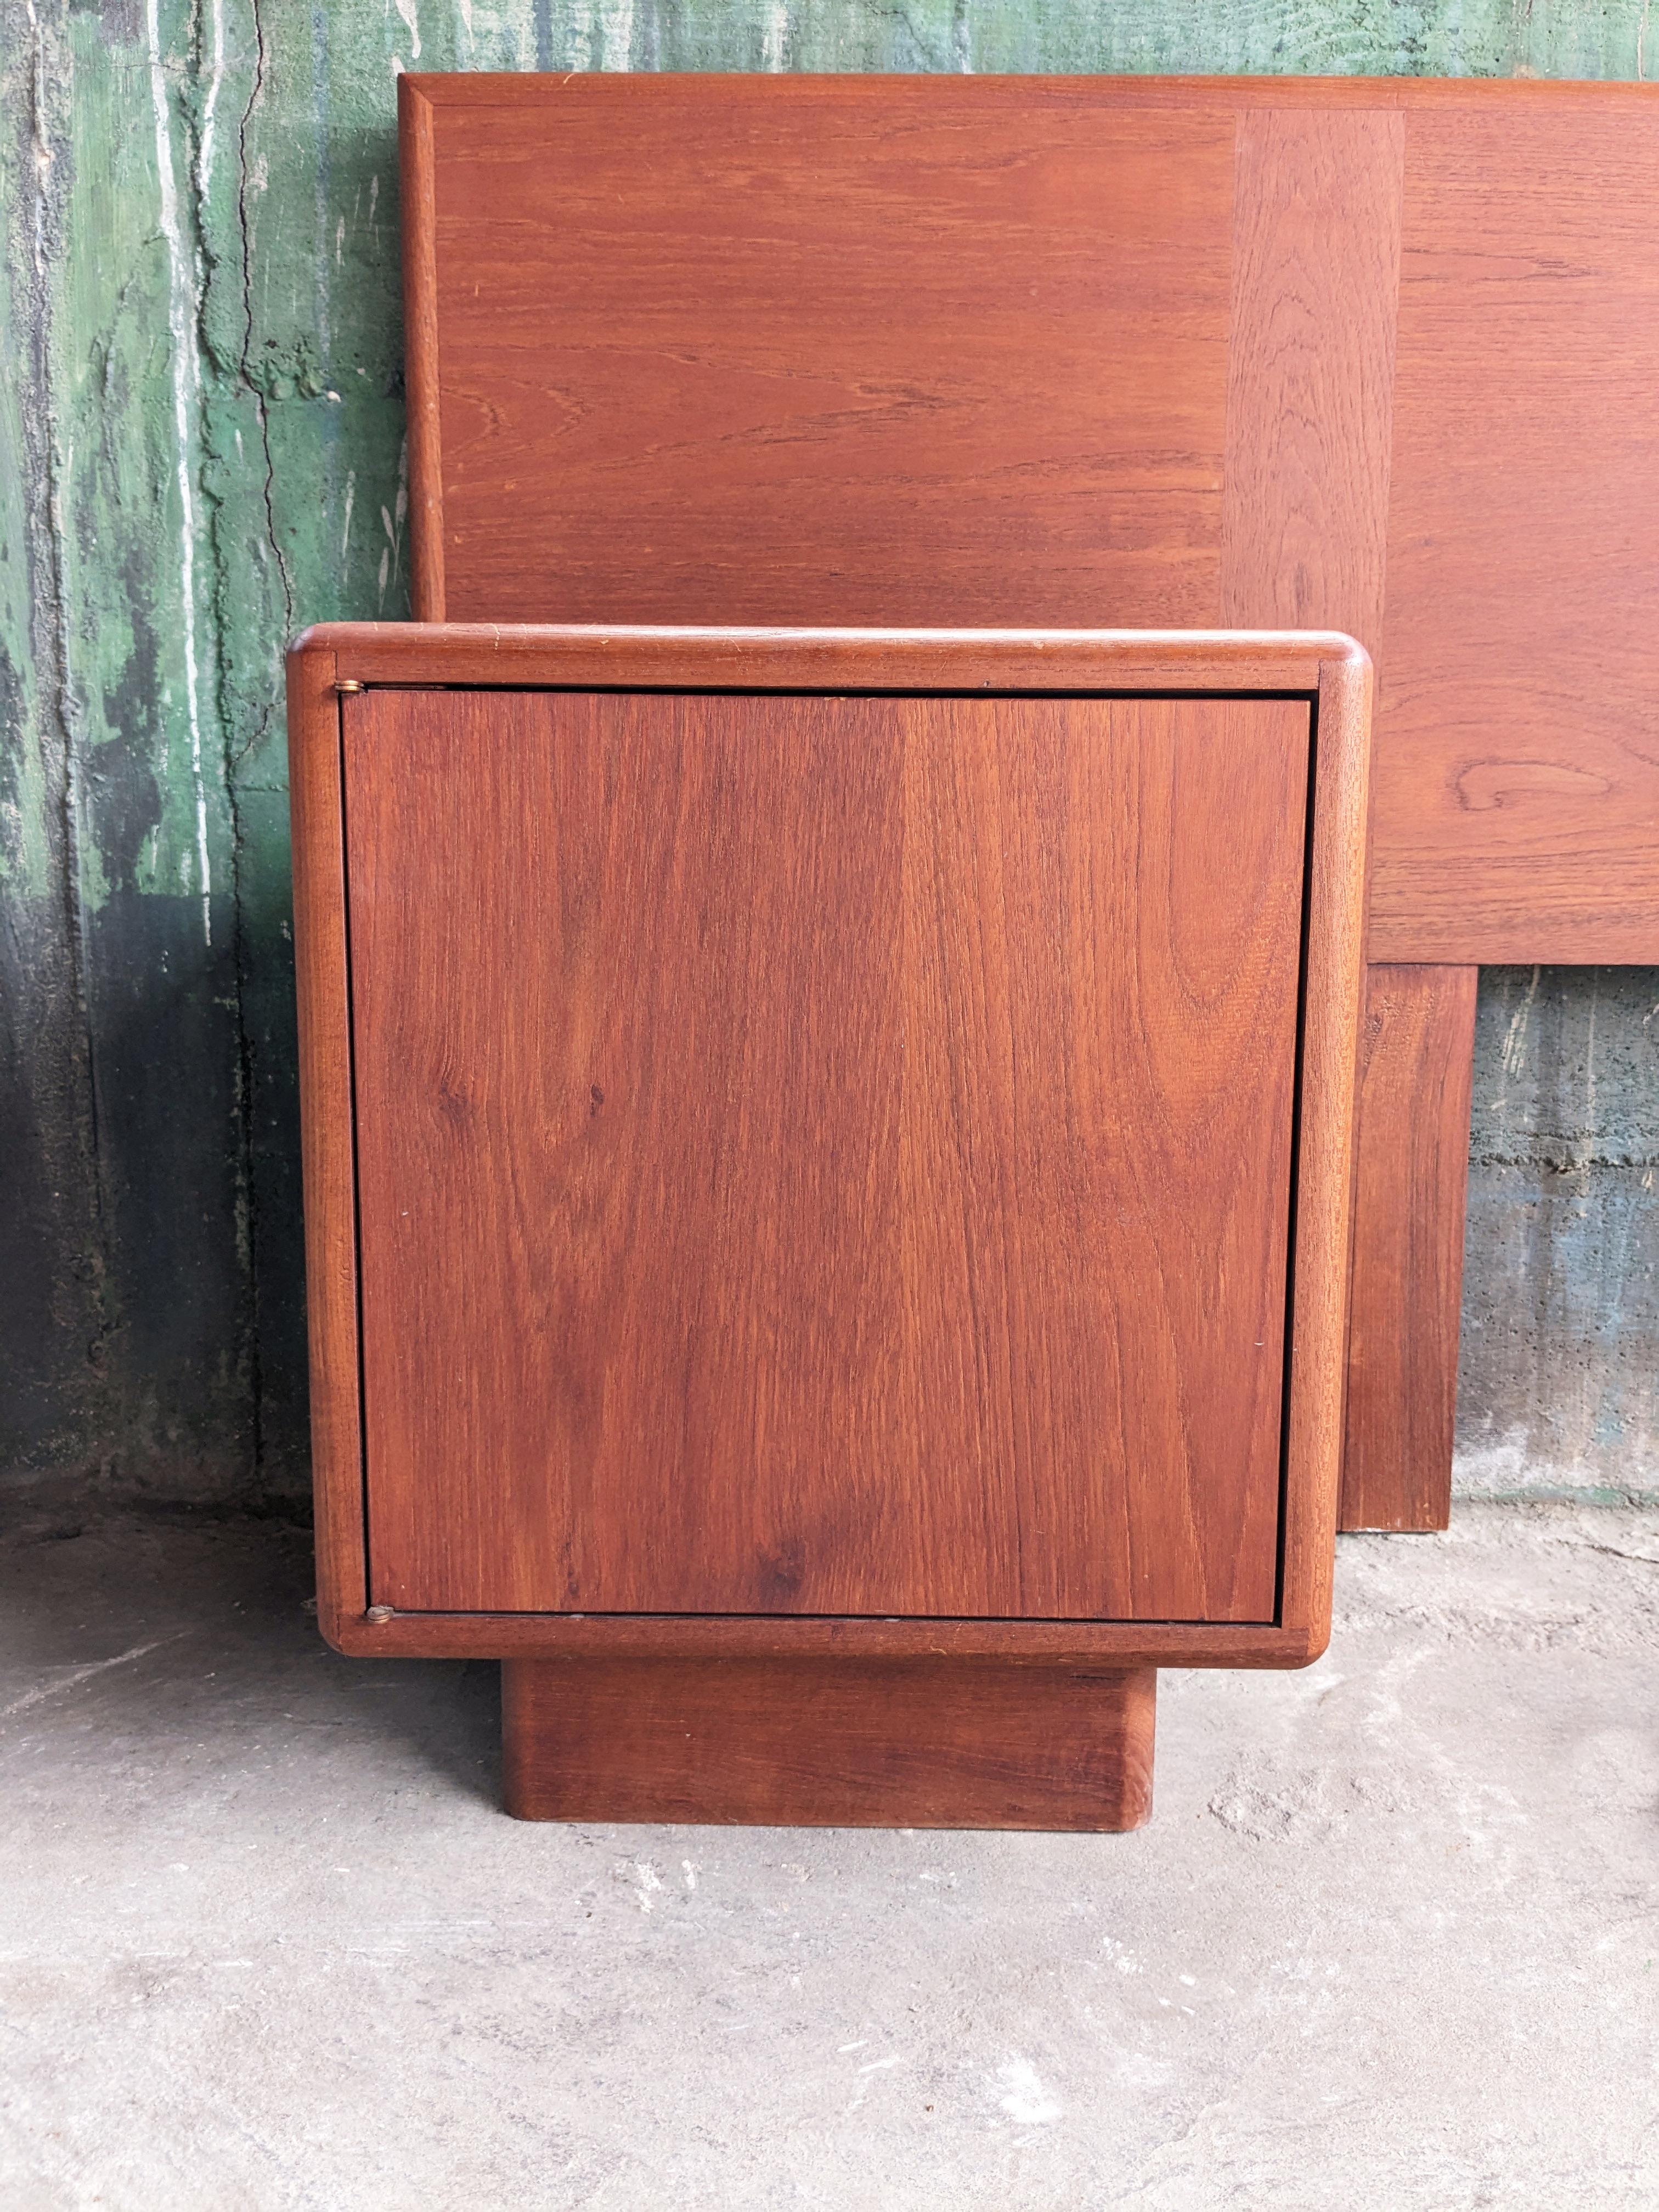 Danish MCM Long Rosewood Teak Headboard with Attached Storage Nightstands, 70s For Sale 5